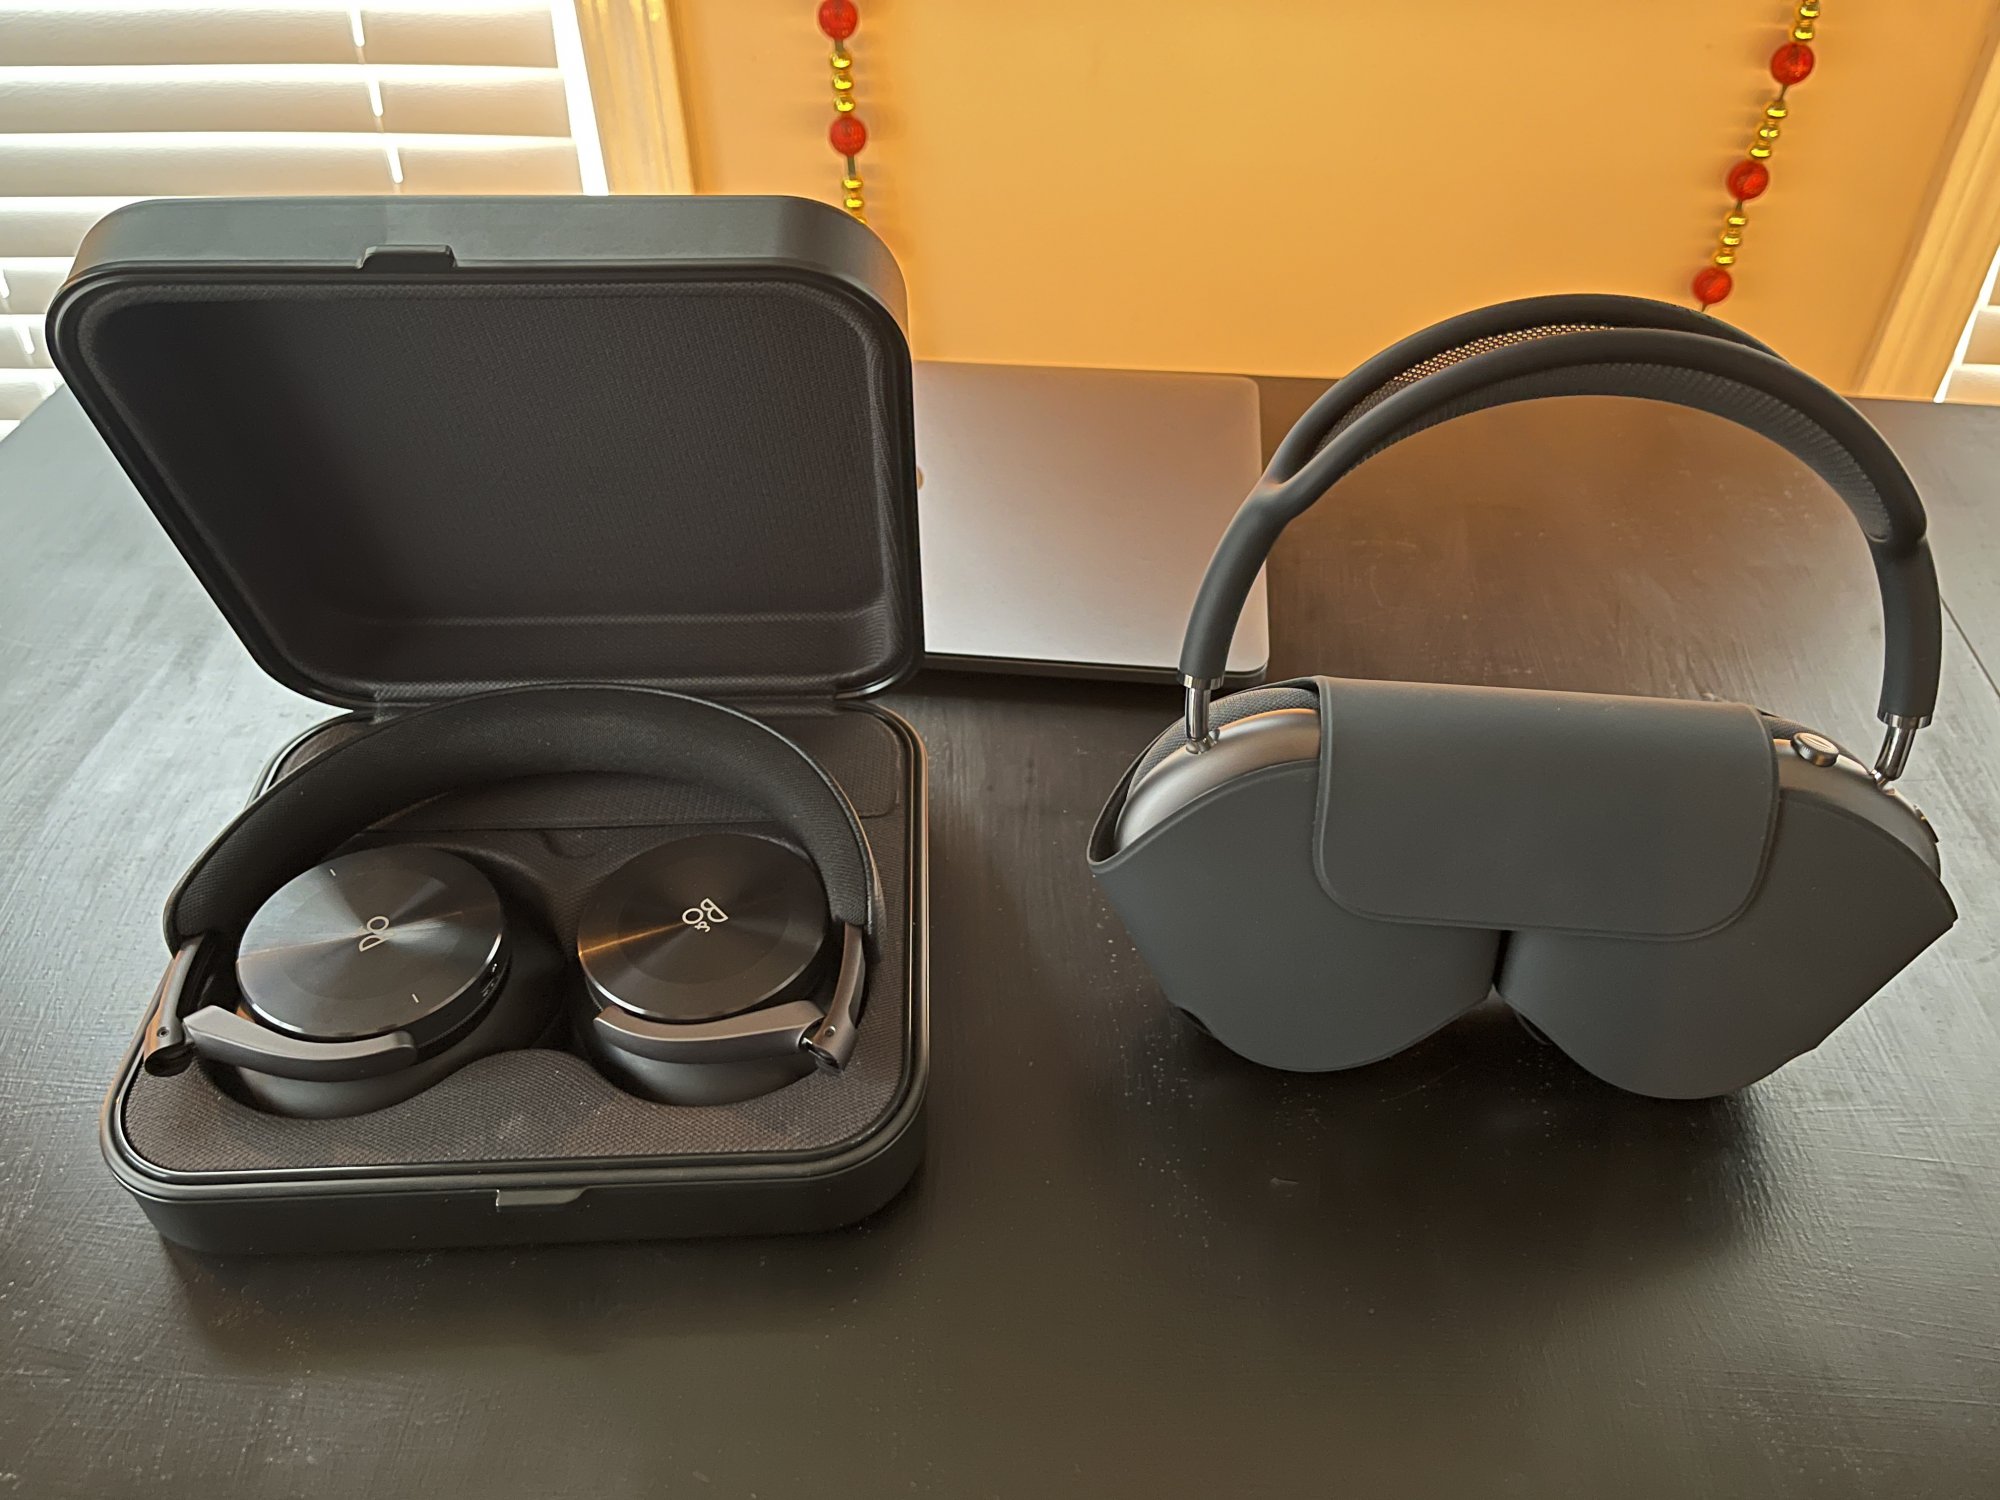 indsats Autonom rent My AirPods Max vs Bang and Olufsen H95 comparison review | MacRumors Forums